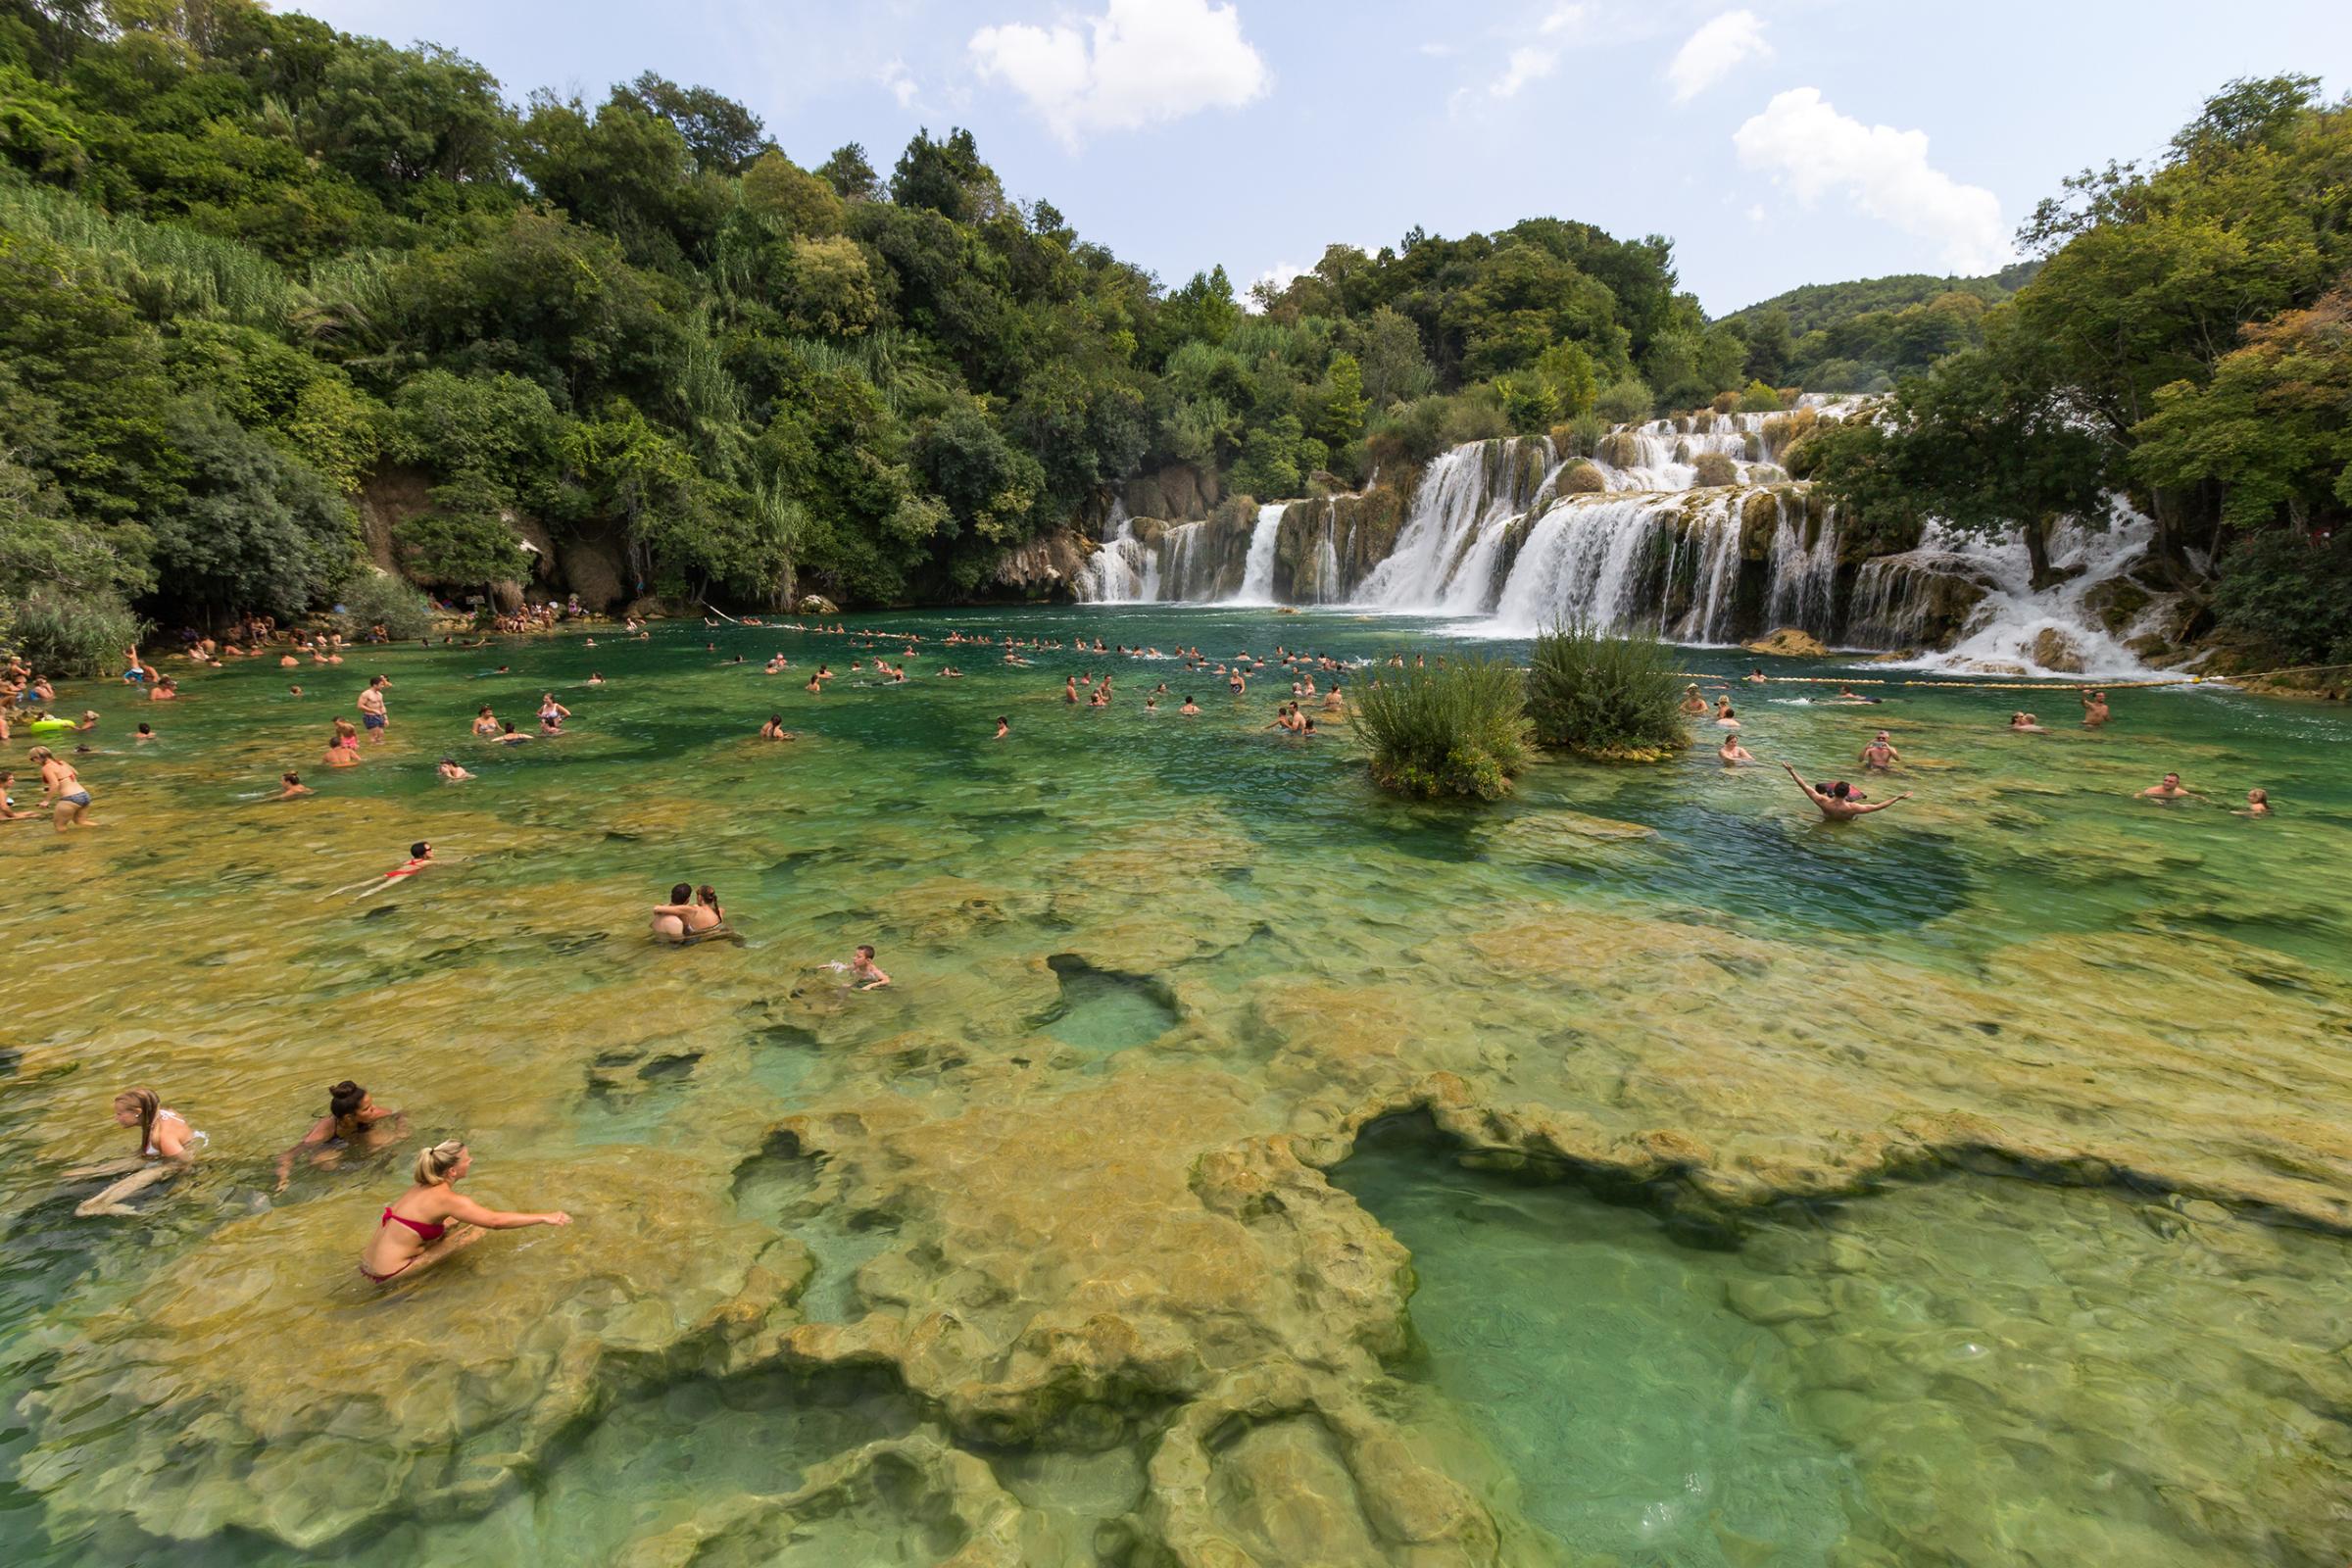 People swimming at the Krka National Park